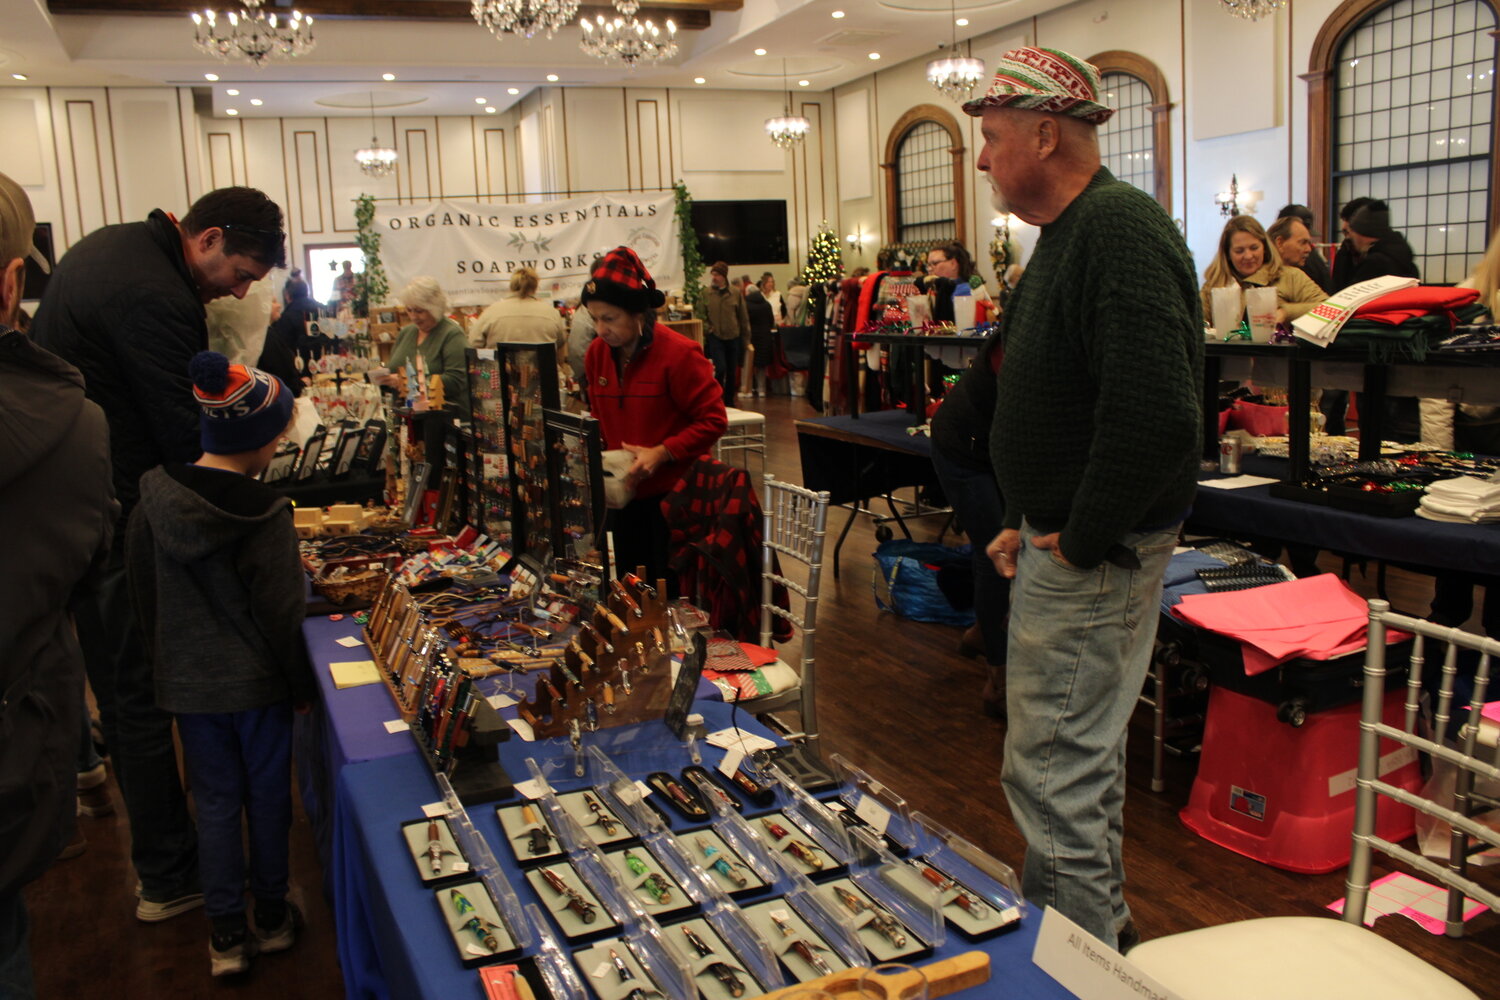 Community members browsed the different crafts and goods sold at the Christkindl Markt.